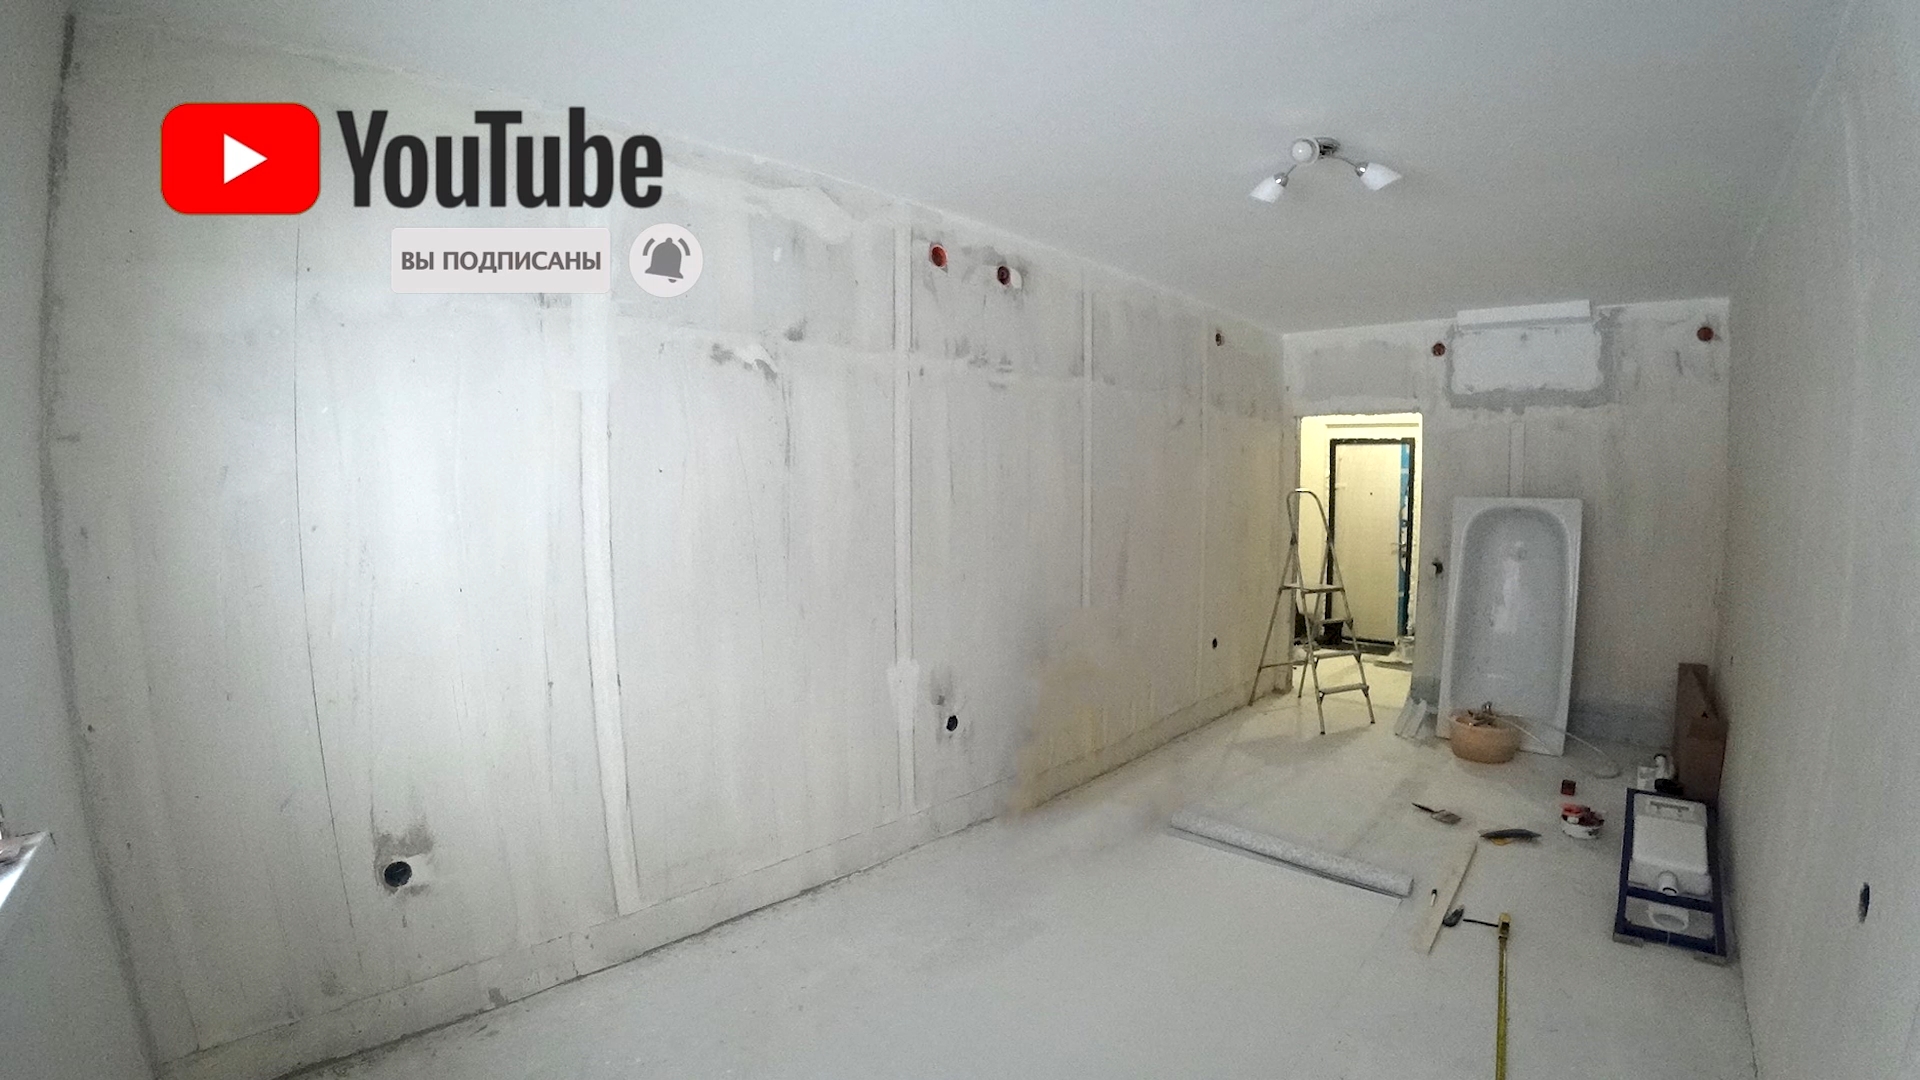 1 Pre-finishing of the kitchen-living room and living room (Apartment renovation) - My, Repair, Repair of apartments, Full construction, Video, Longpost